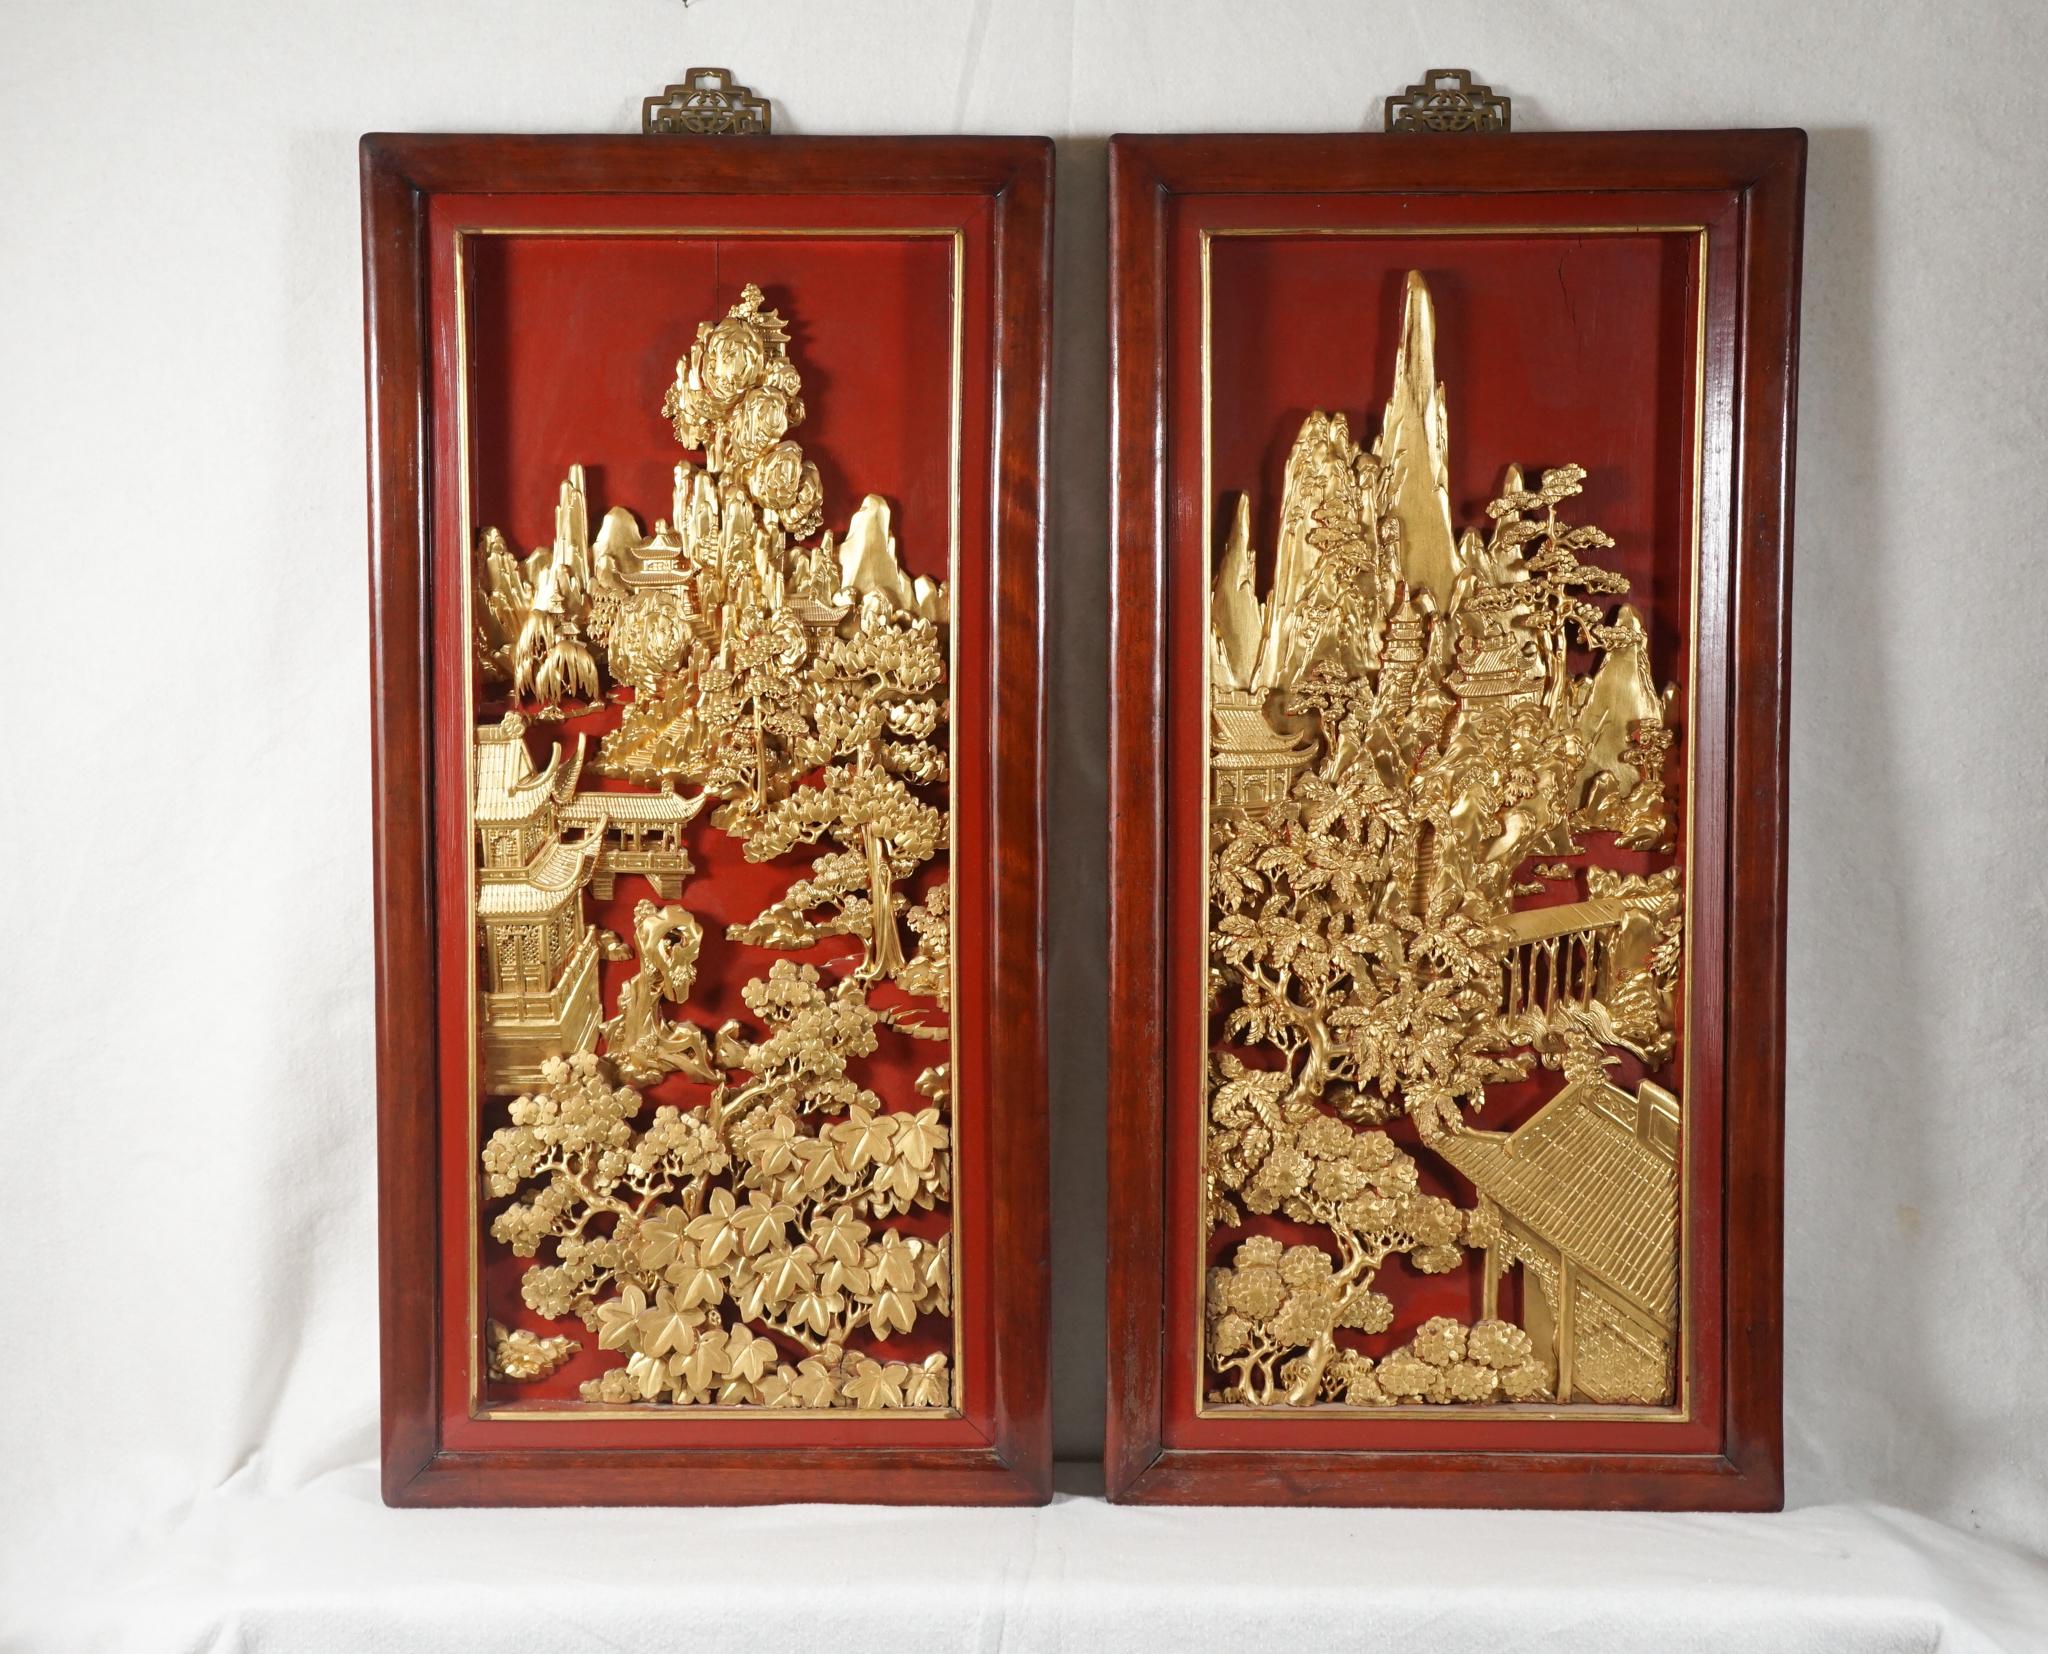 These elaborate and deeply carved panels are mid-20th century. The carving is very detailed and on a rather deep heavy wooden panel. All the raised areas are richly detailed and gilded while the background is lacquered a bright Chinese red. This is